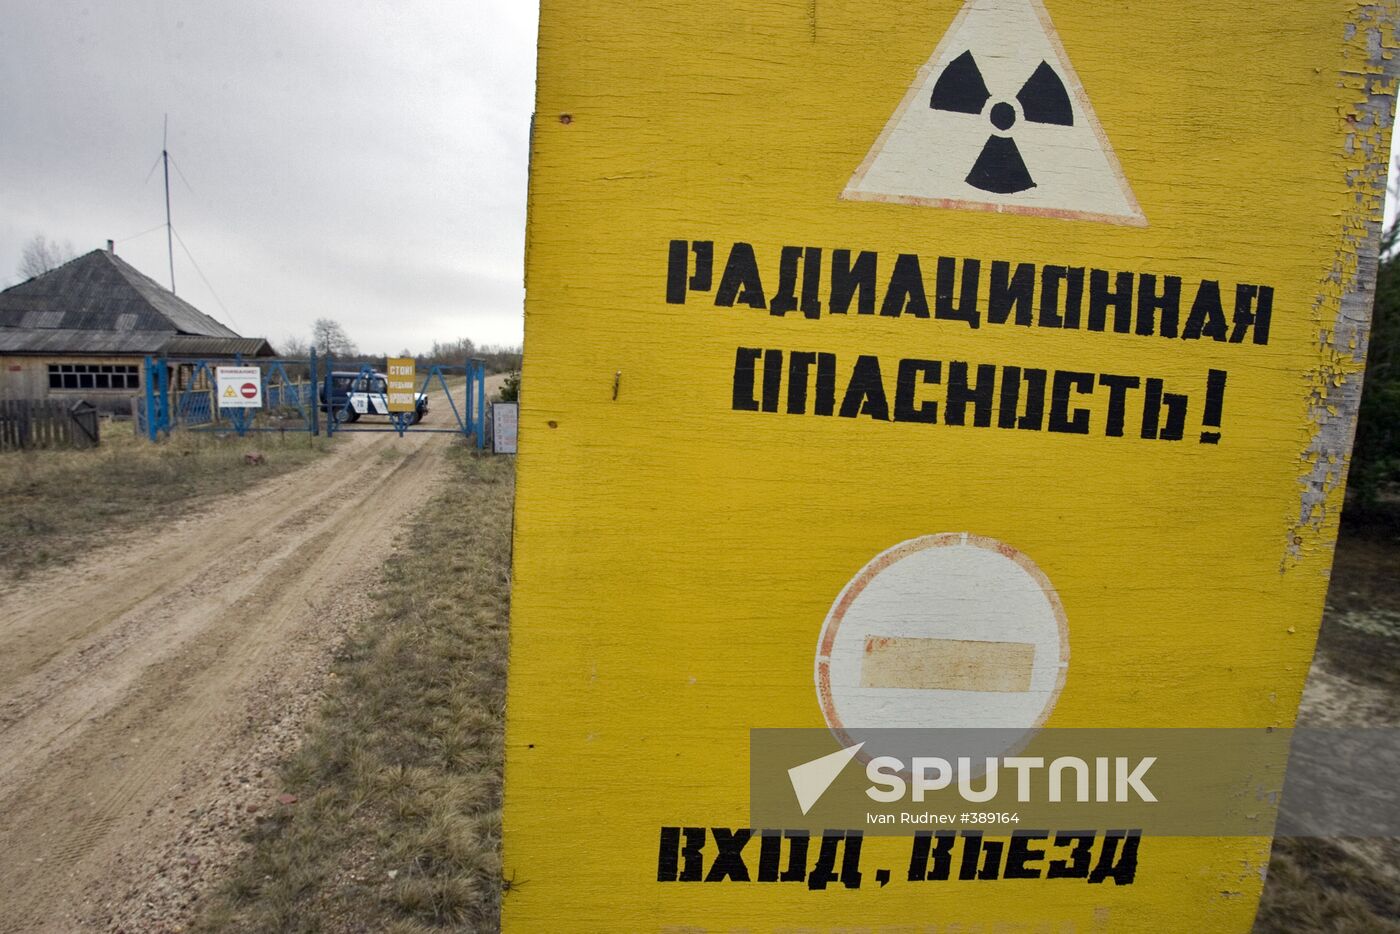 The Chernobyl nuclear power plant's exclusion zone